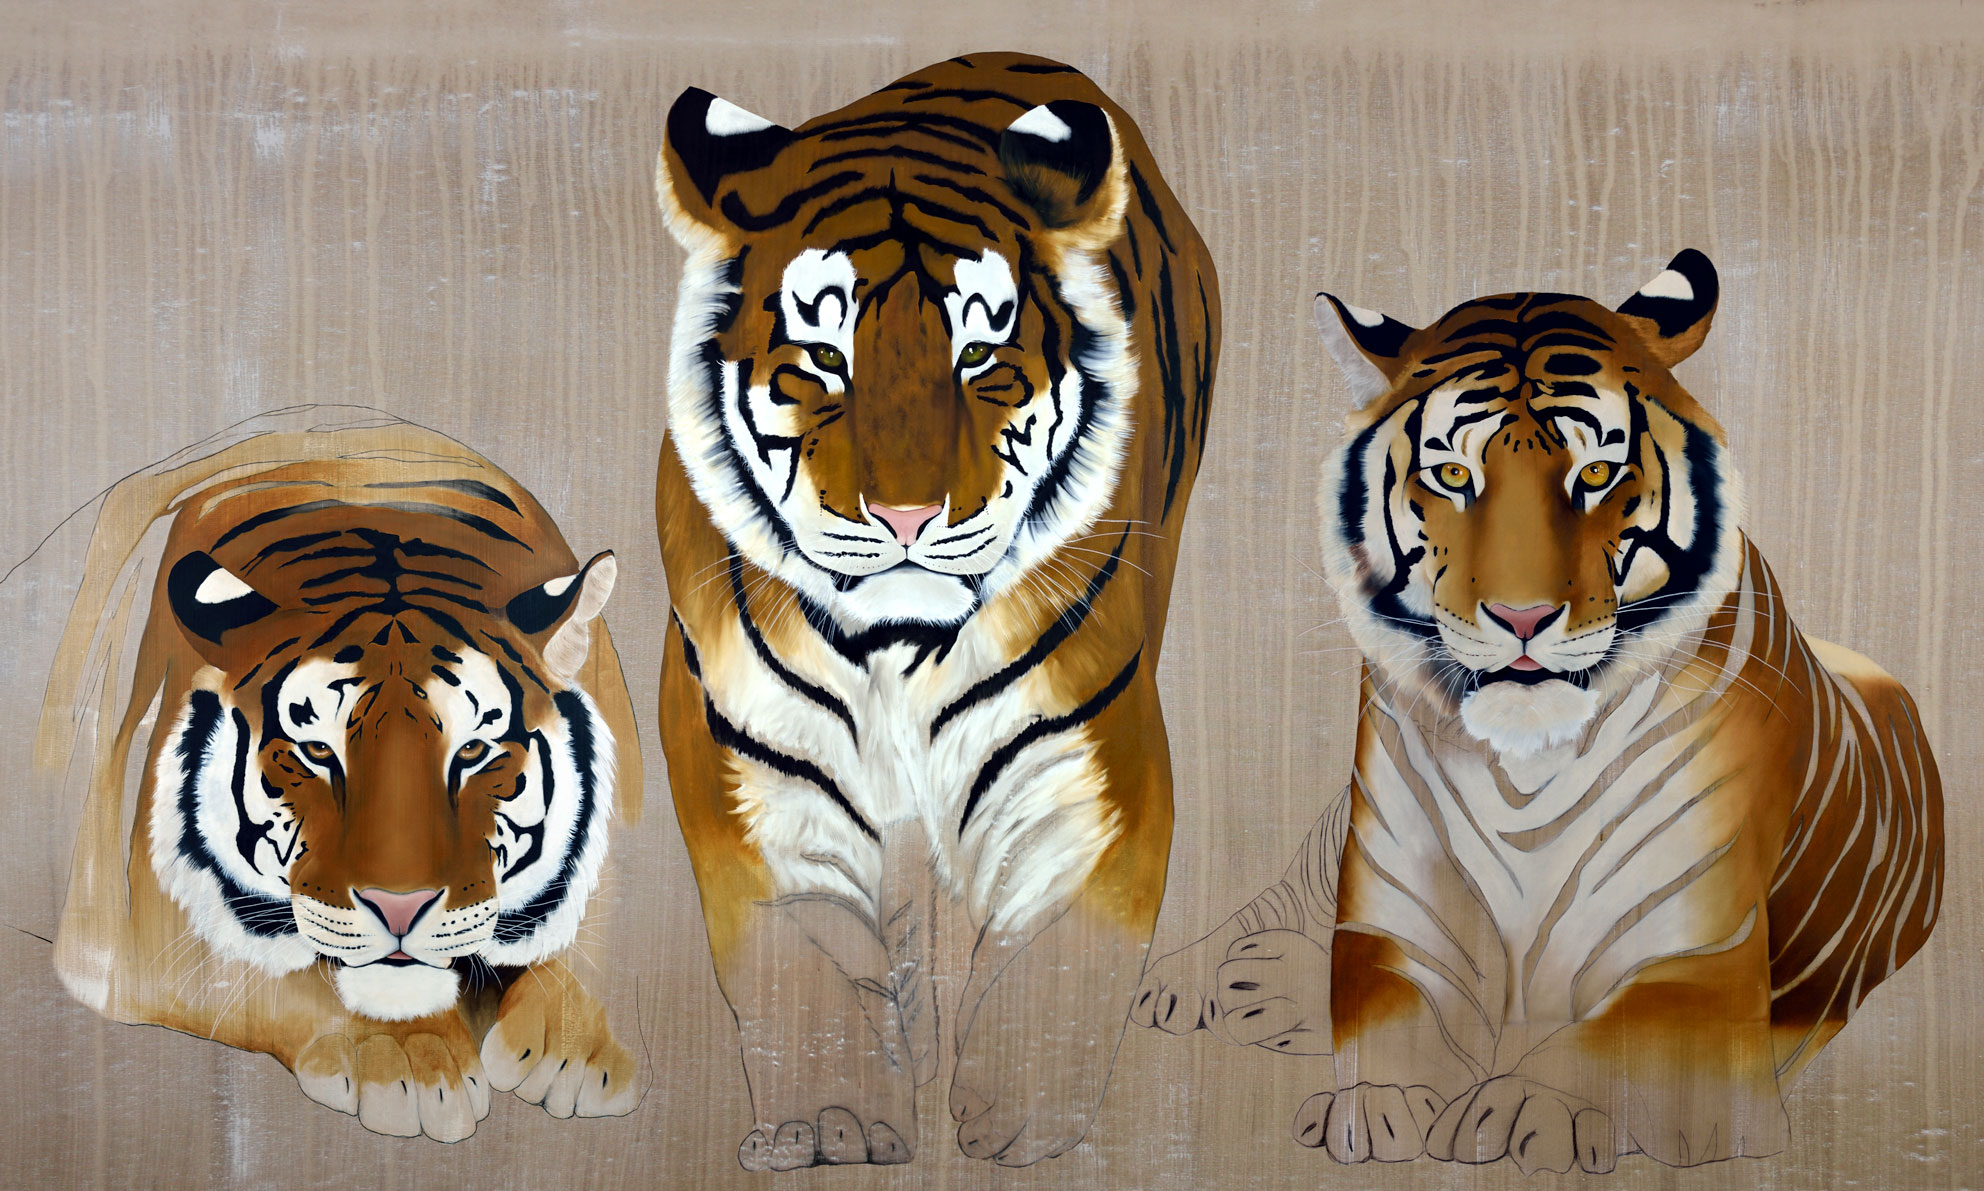 3-TIGERS tiger-panthera-tigris Thierry Bisch Contemporary painter animals painting art decoration nature biodiversity conservation